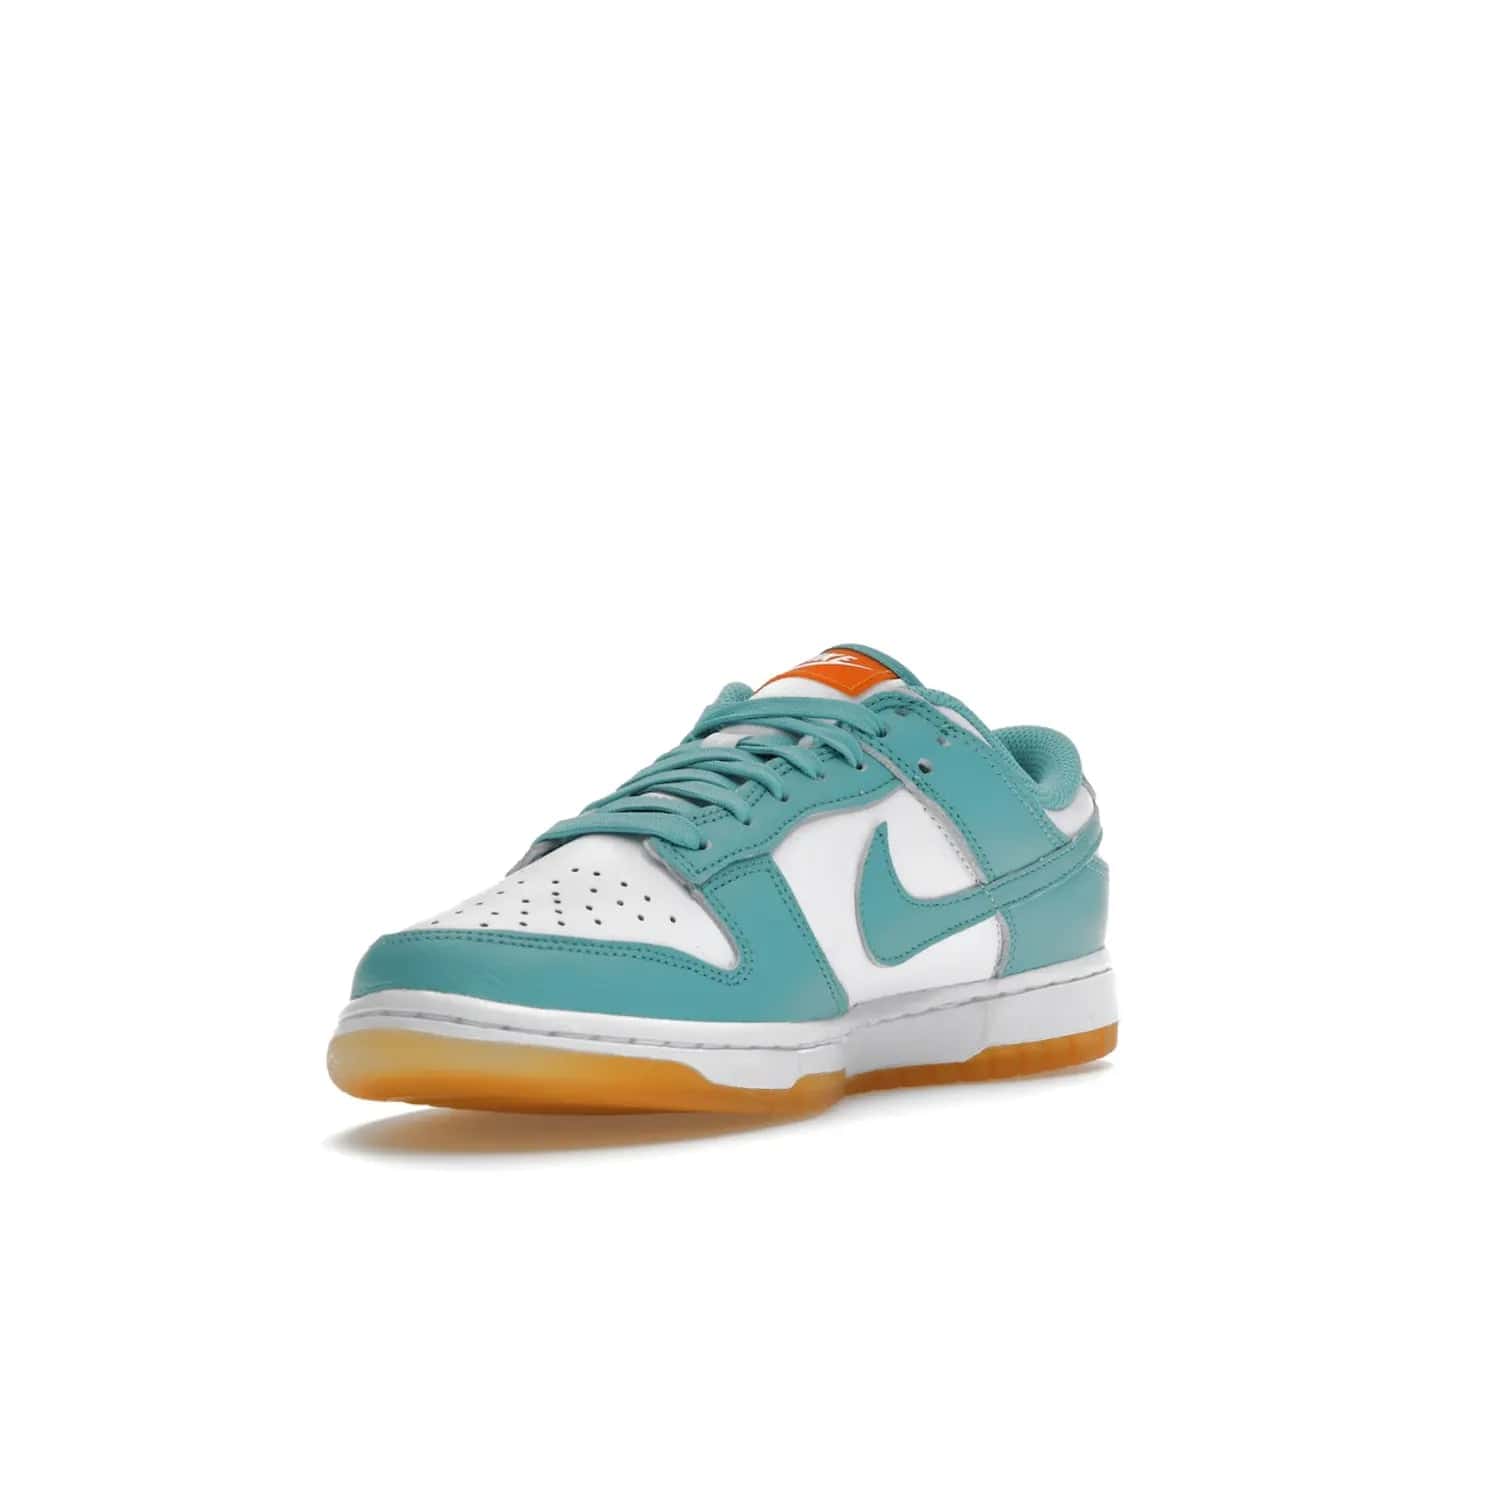 Nike Dunk Low Teal Zeal (Women's) - Image 14 - Only at www.BallersClubKickz.com - A white leather upper with teal overlays and Swooshes, plus yellow and embroidered accents make the Nike Dunk Low Teal Zeal (Women's) the perfect statement piece for any wardrobe.